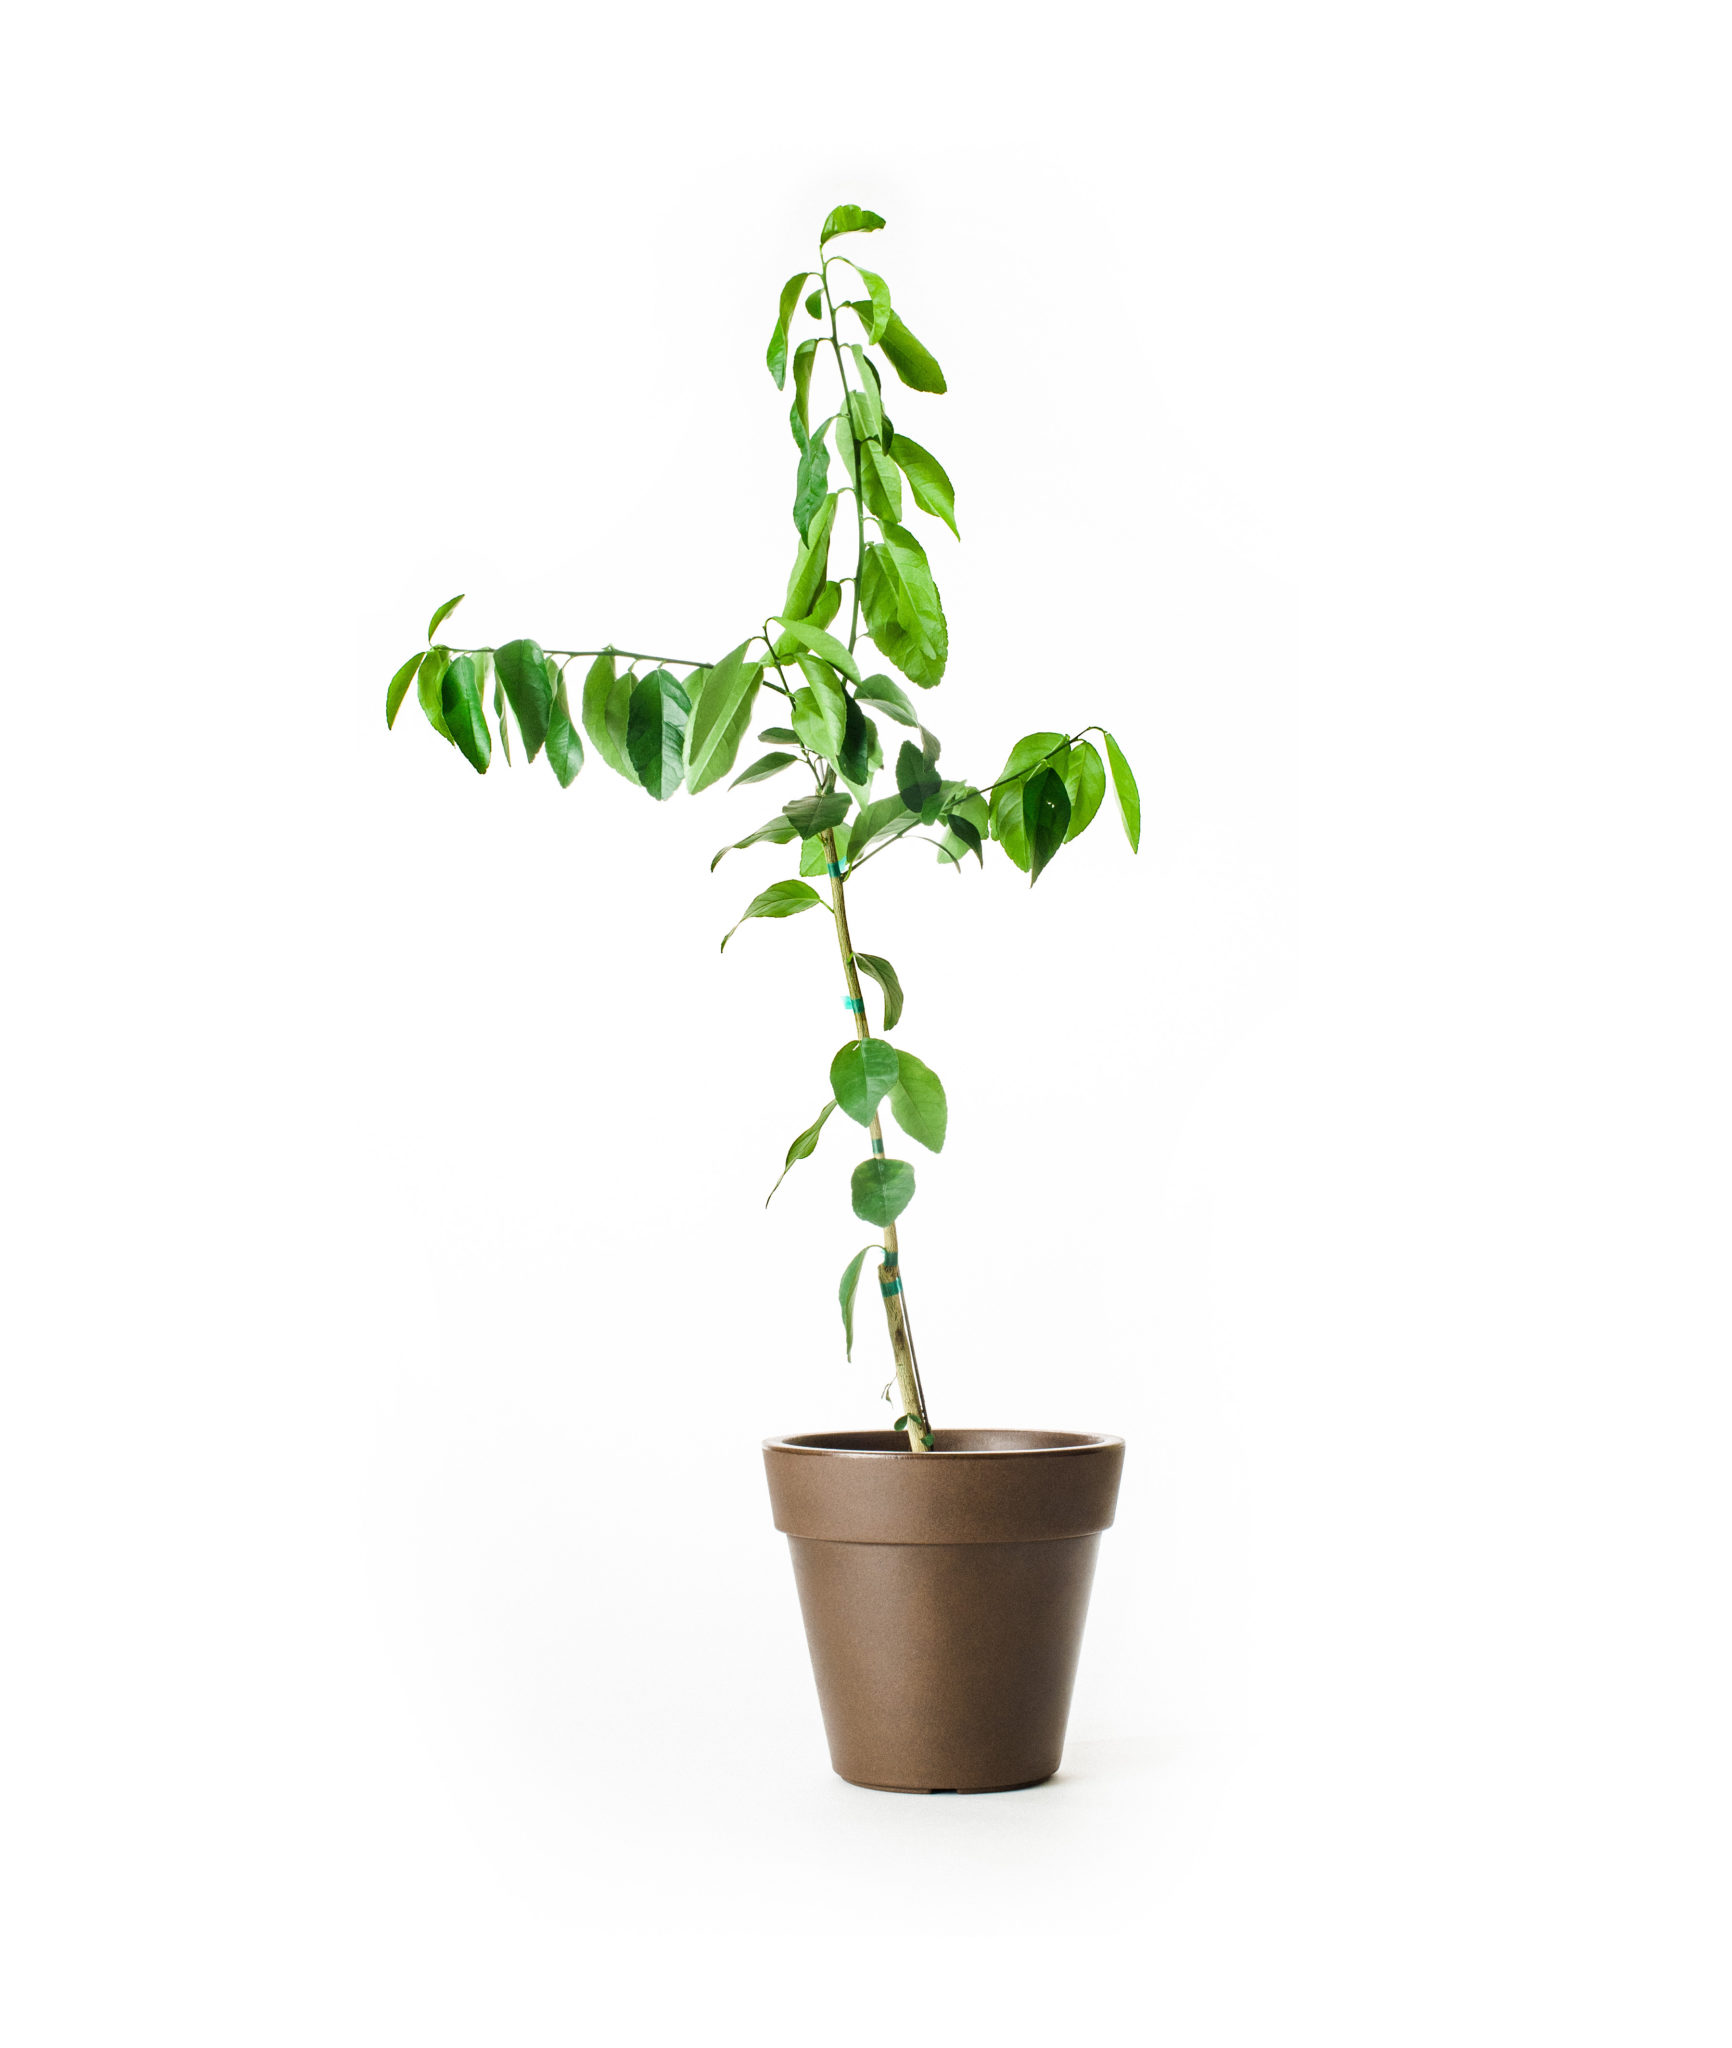 Image of Dwarf Persian (Bearss) Lime Tree (Age: 2 - 3 Years Height: 2 - 3 FT)